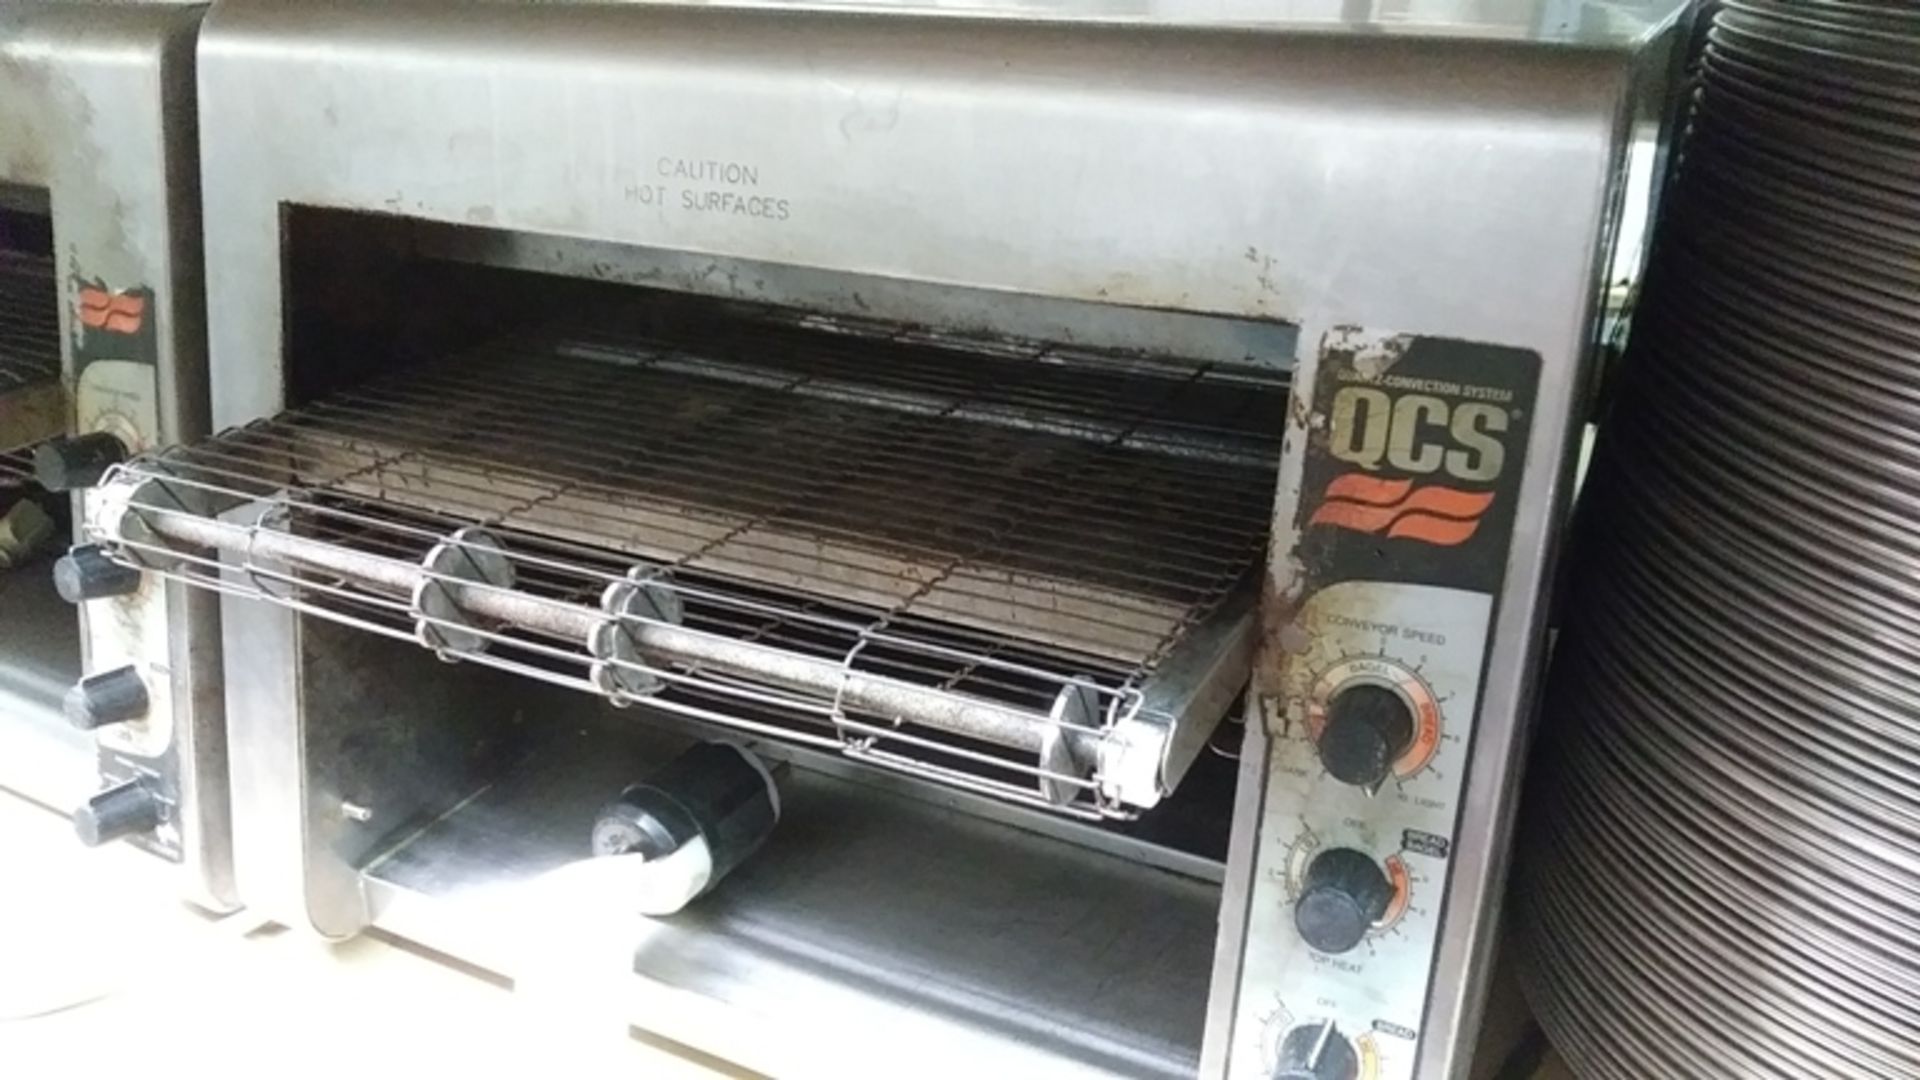 QCS COMMERCIAL TOASTER OVEN - Image 2 of 2